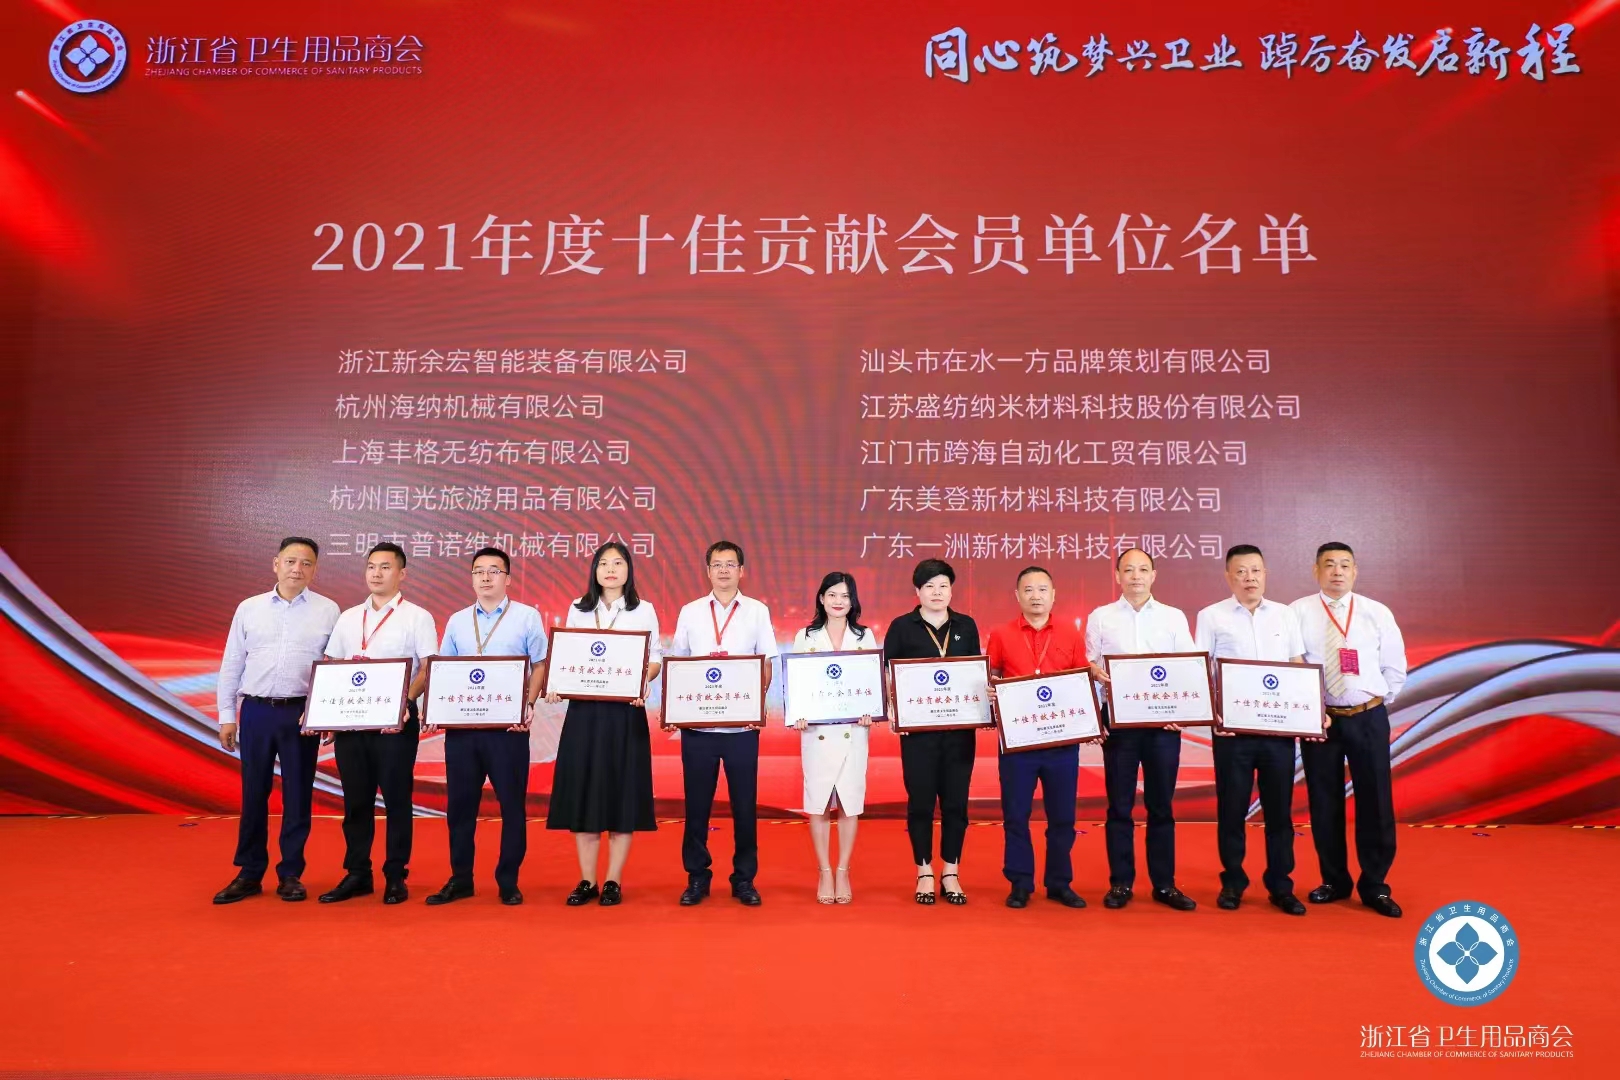 Intro to Work Report of the first Chamber of Commerce of Sanitary Products in Zhejiang Province Wahrheits